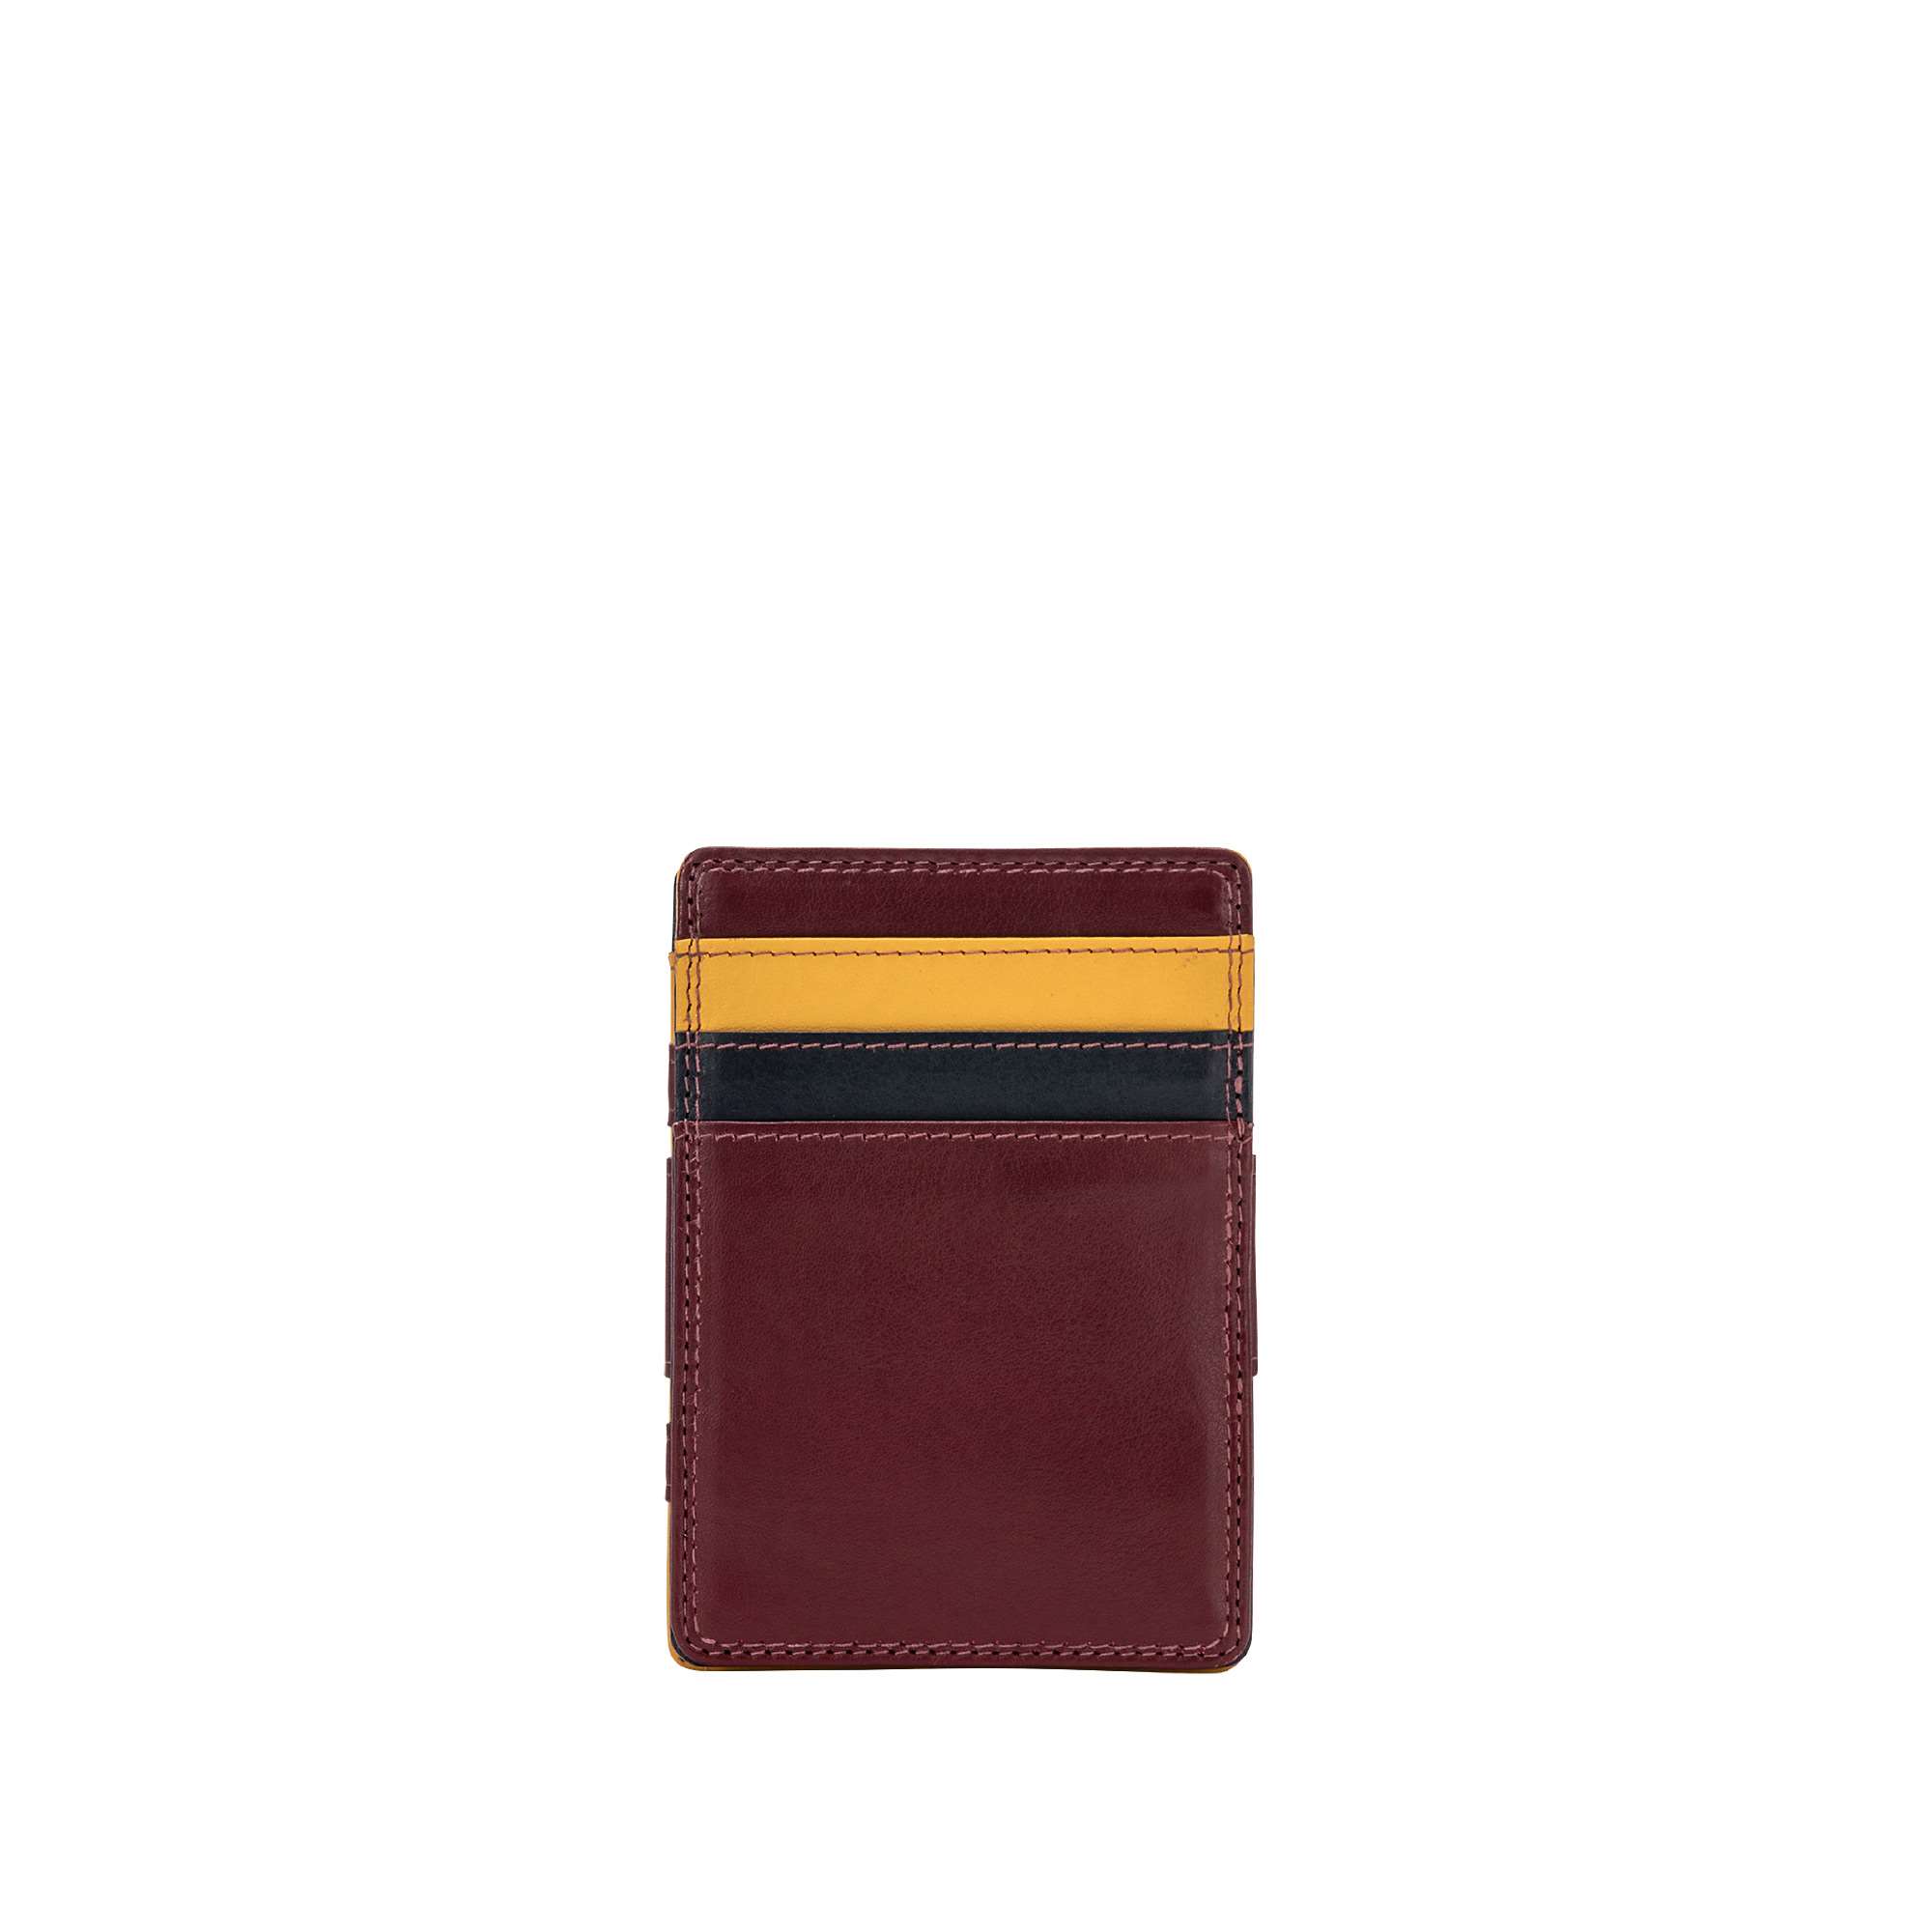 Portefeuille - Colorful - Lanzarote - Rouge Bourgogne - (534-799-11) - Homme